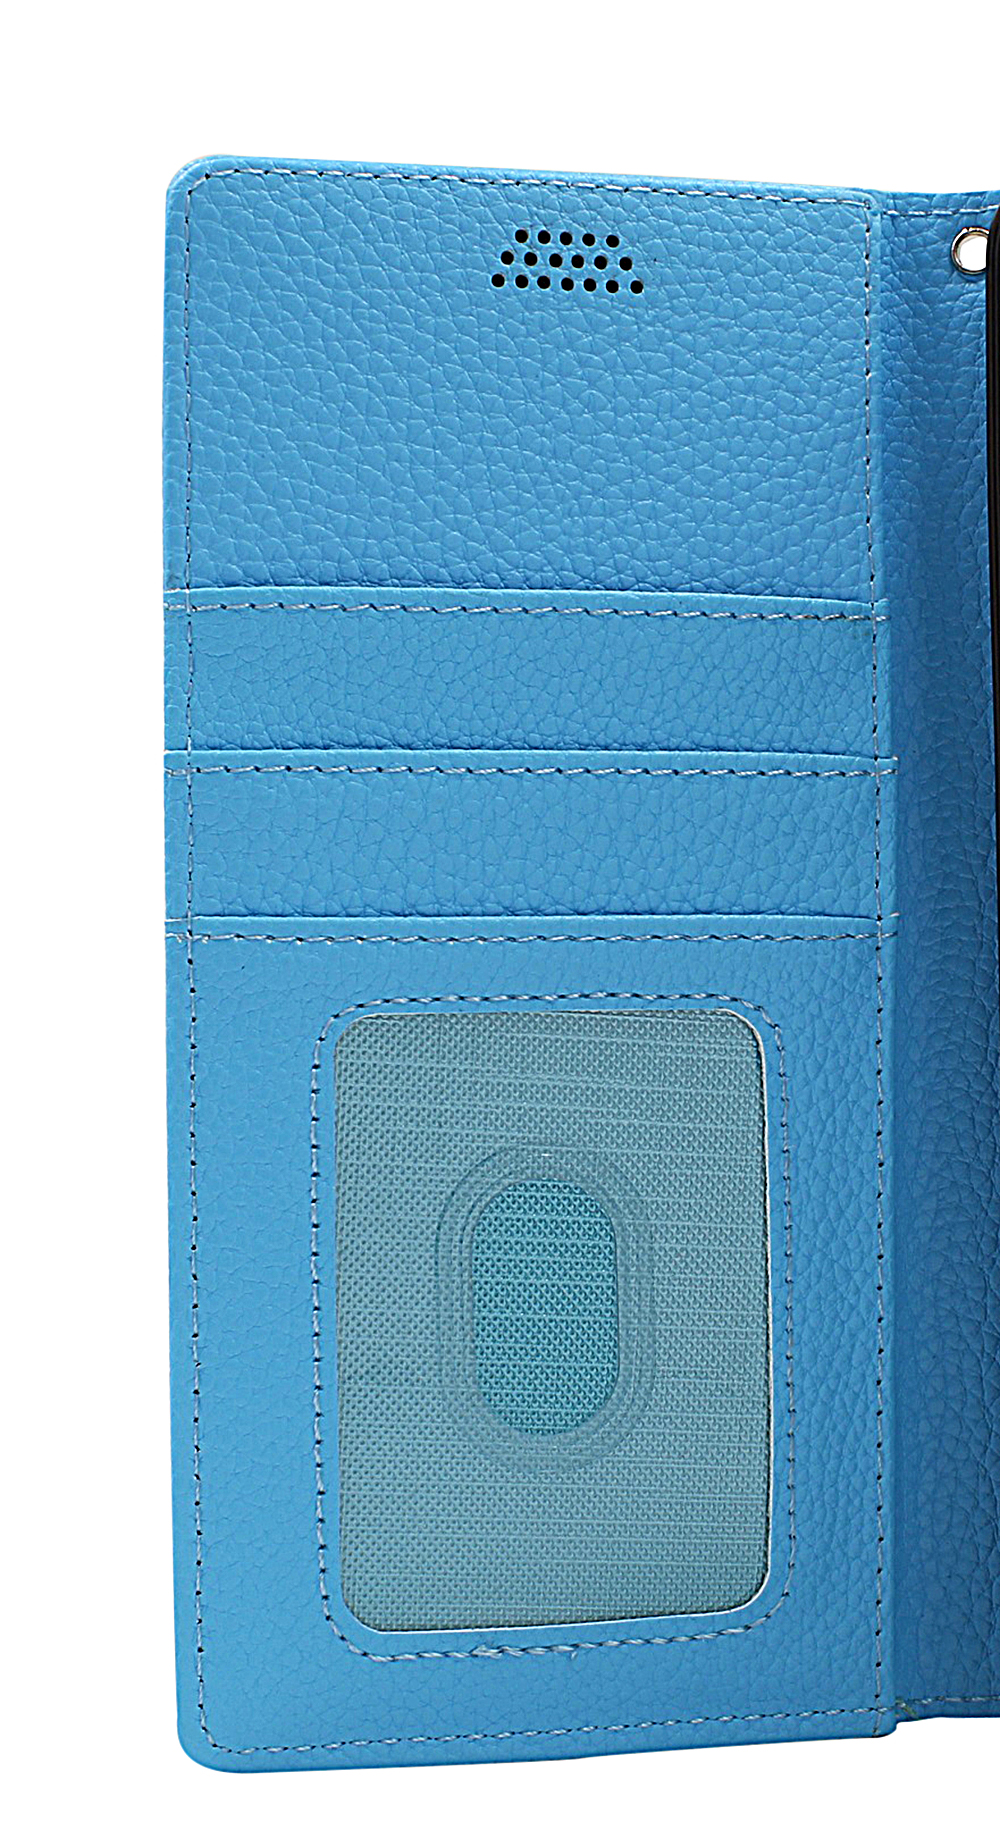 New Standcase Wallet Huawei Mate 40 Pro